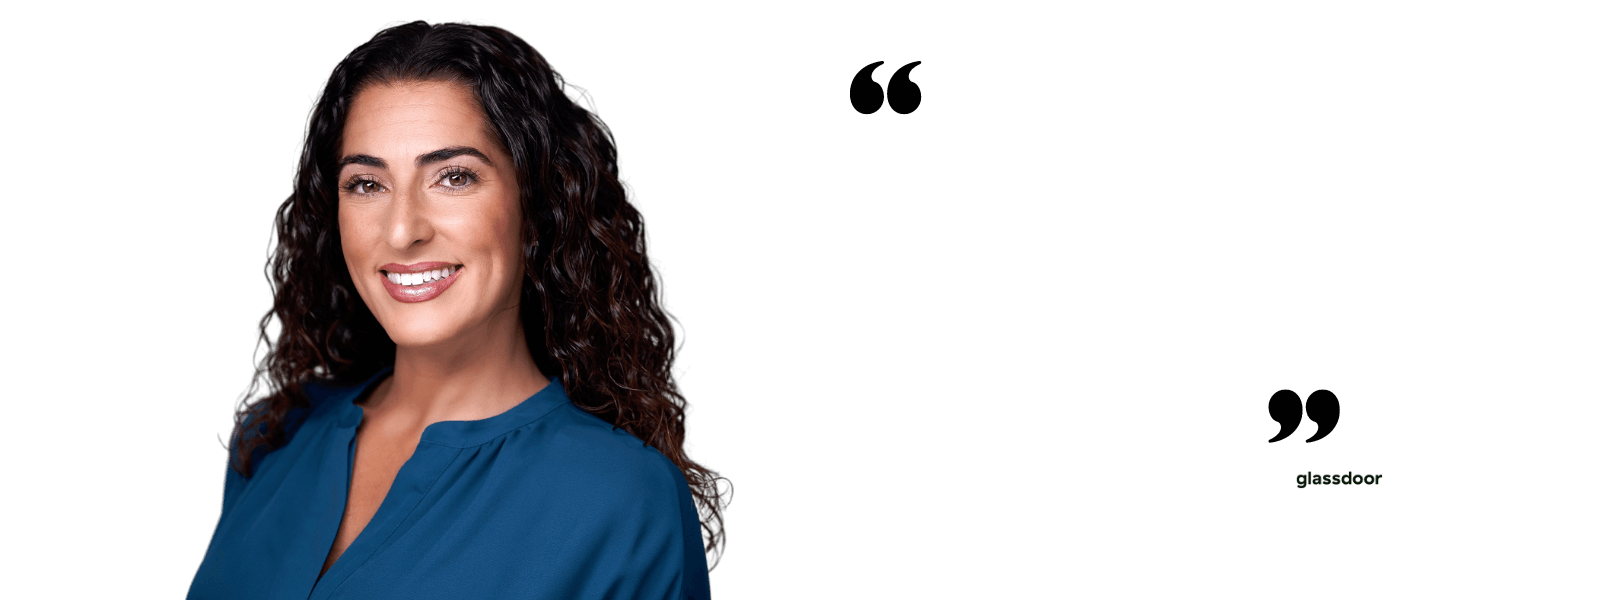 a headshot of a movementx physical therapist along with a quote that mentions how their PT career has been fulfilling